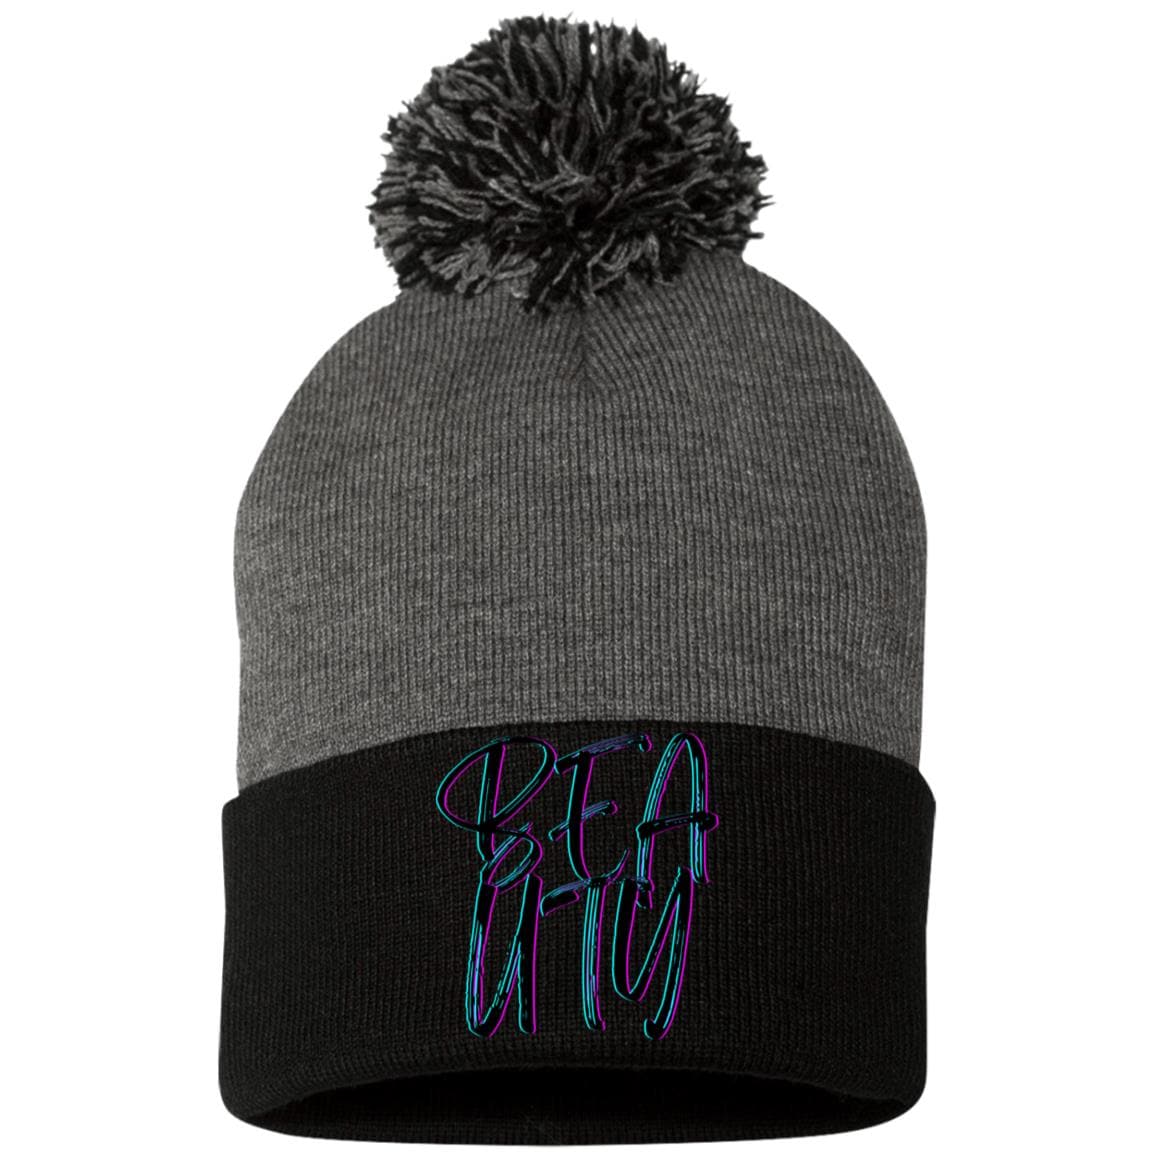 Black Dark Heather One Size - Beauty Embroidered Pom Pom Knit Cap - Hats at TFC&H Co.